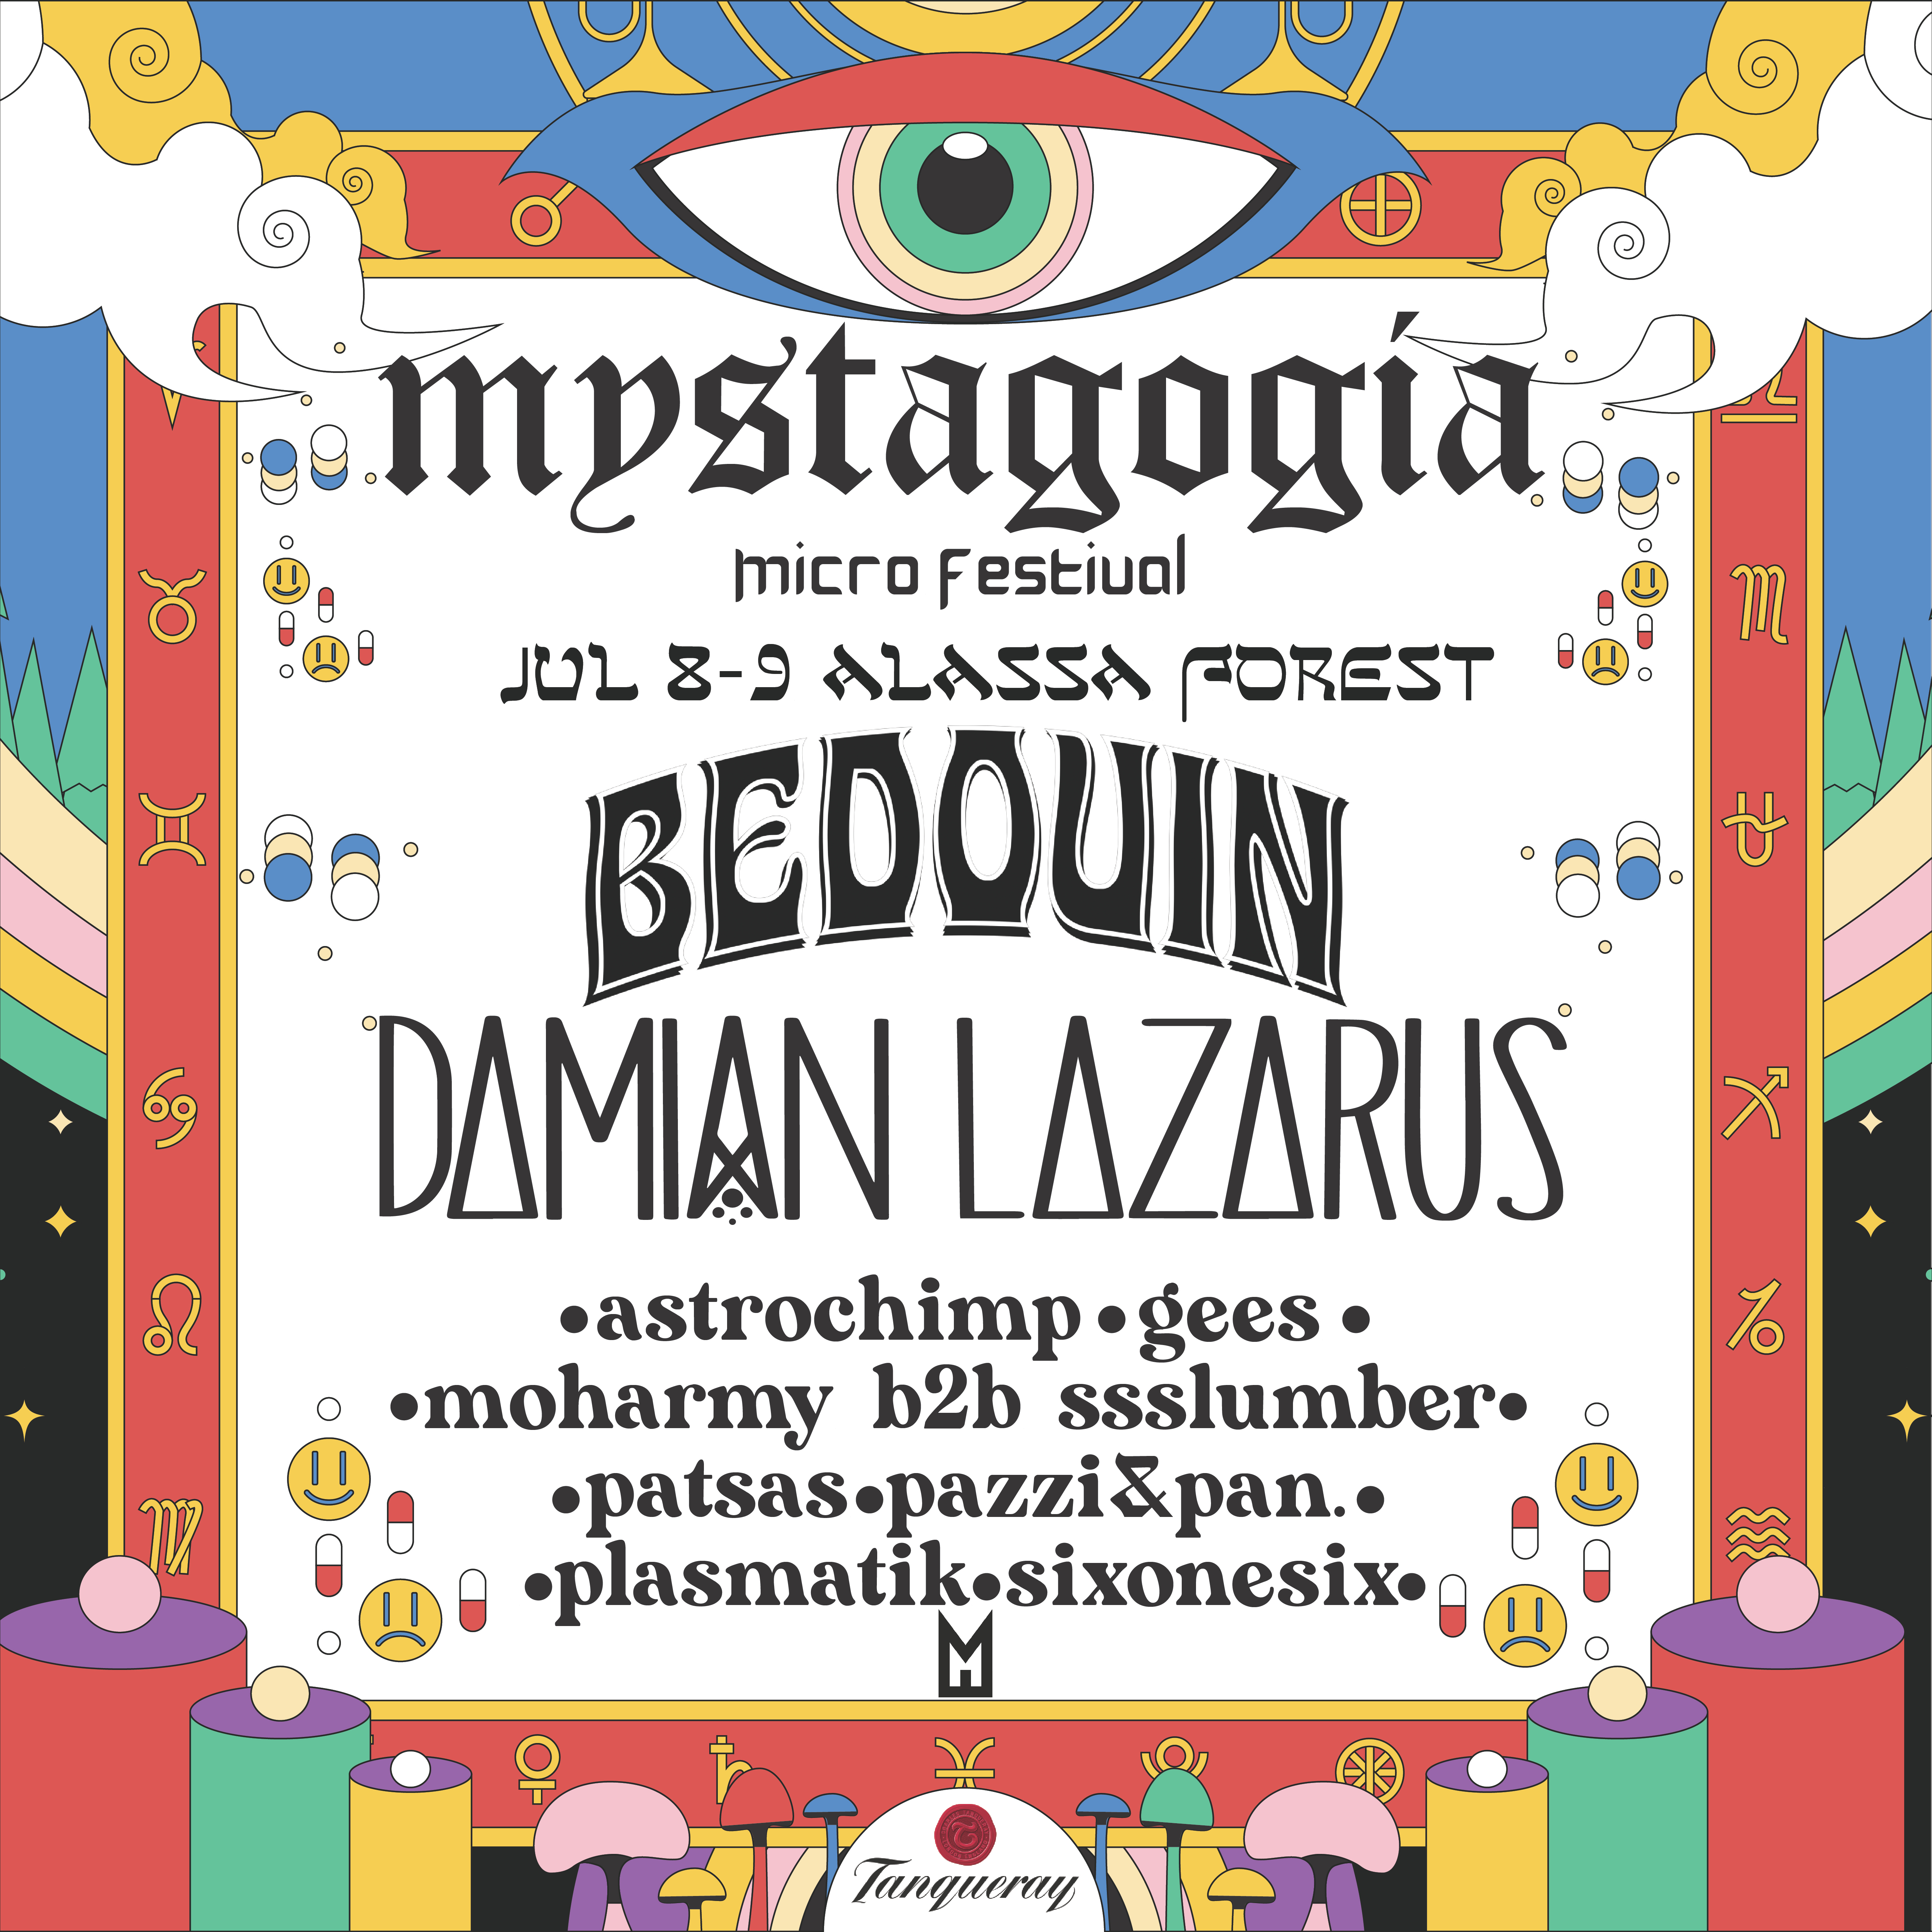 MYSTAGOGIA micro-festival with BEDOUIN AND Damian Lazarus - Flyer front